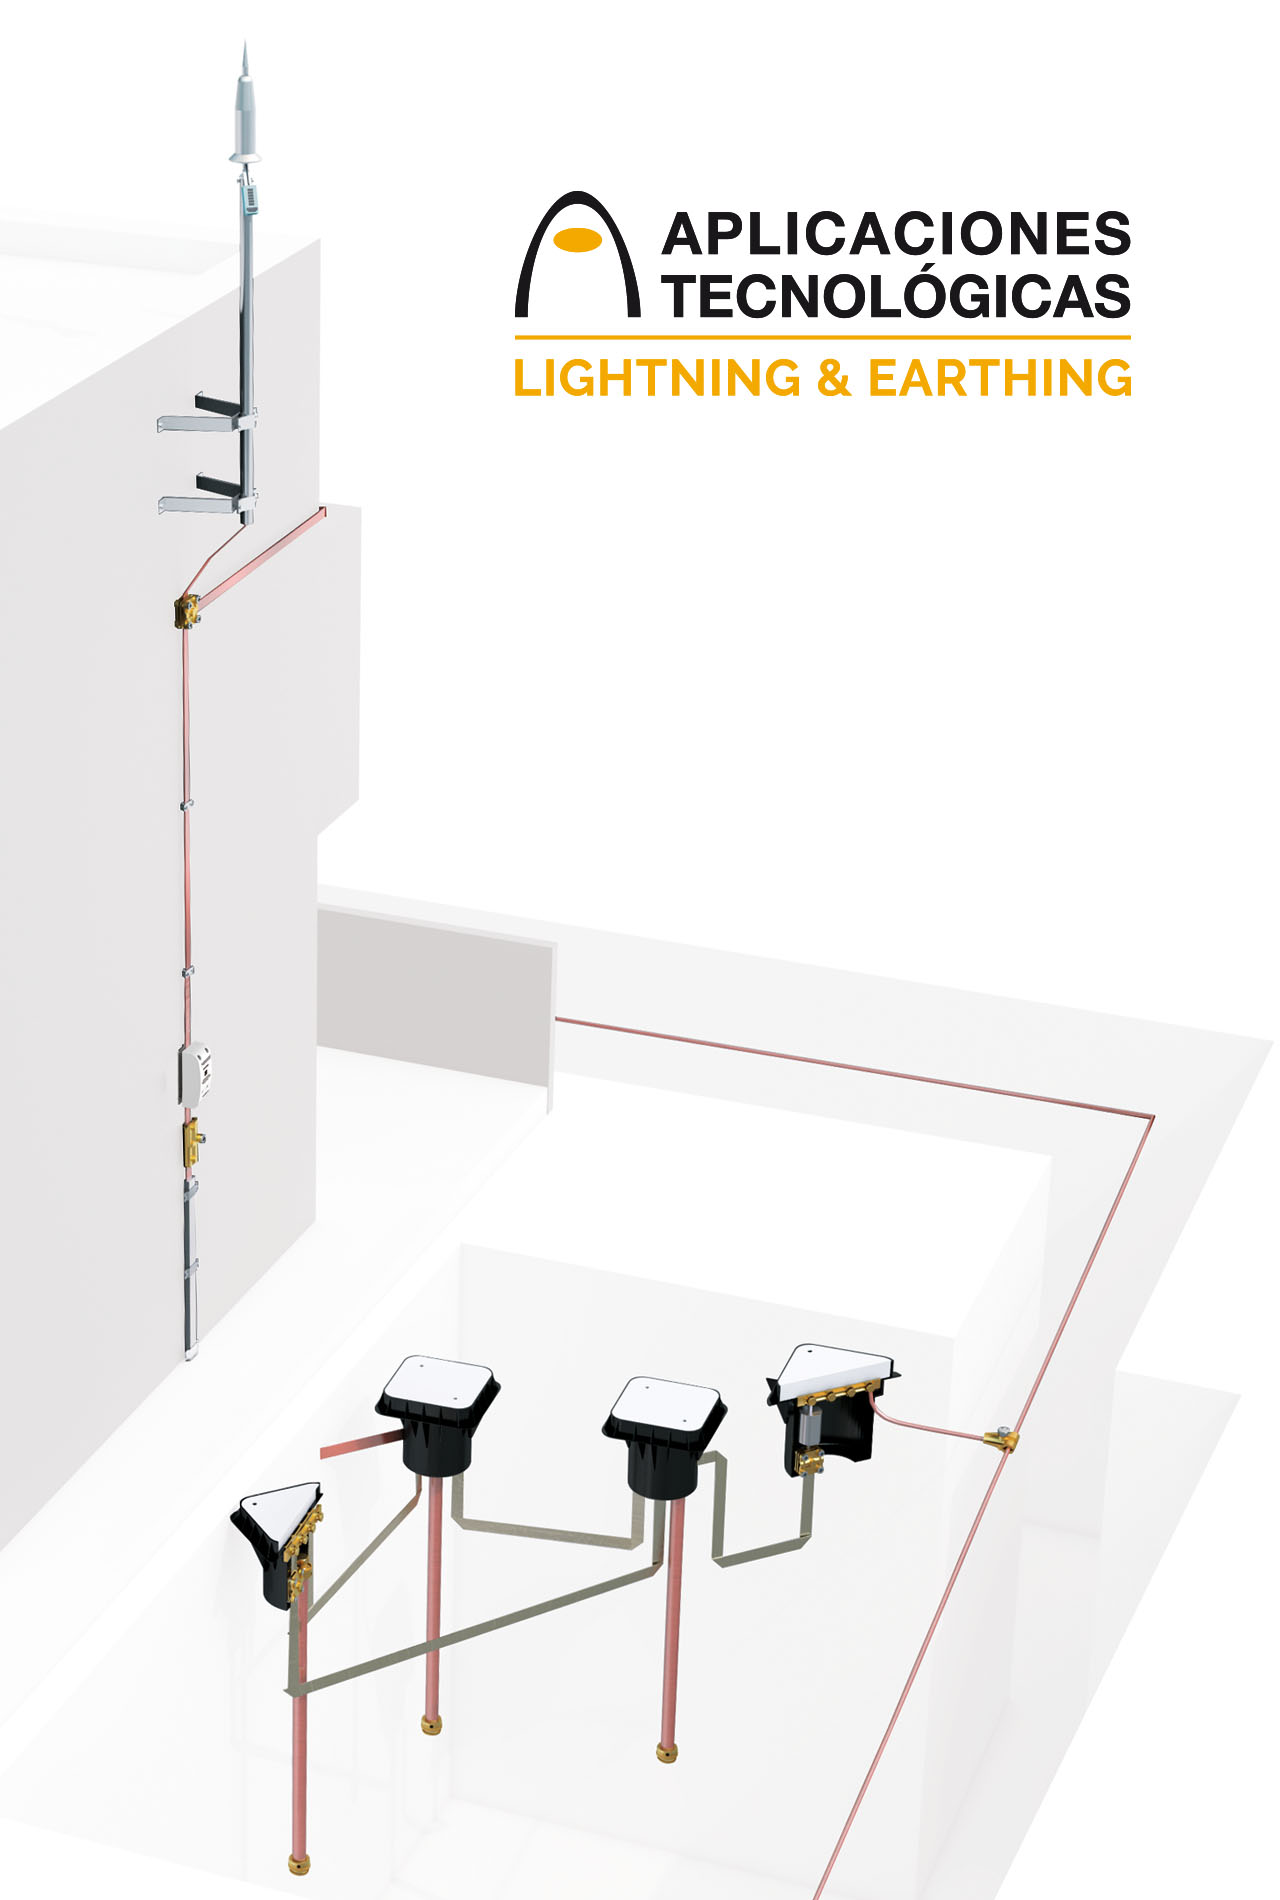 Lightning rod, a permanent measure for protection of occupational risks caused by lightning strikes